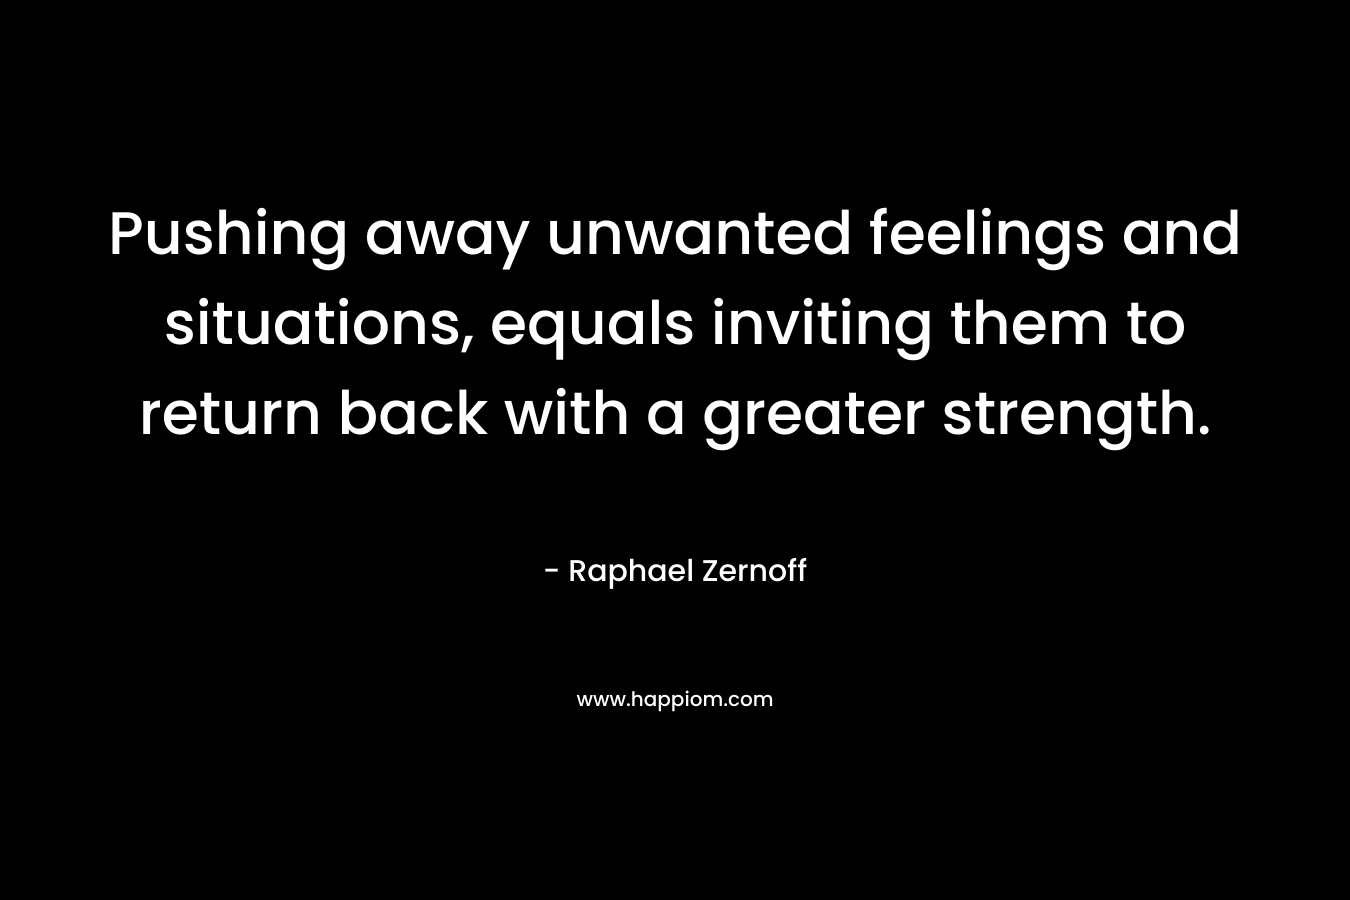 Pushing away unwanted feelings and situations, equals inviting them to return back with a greater strength. – Raphael Zernoff